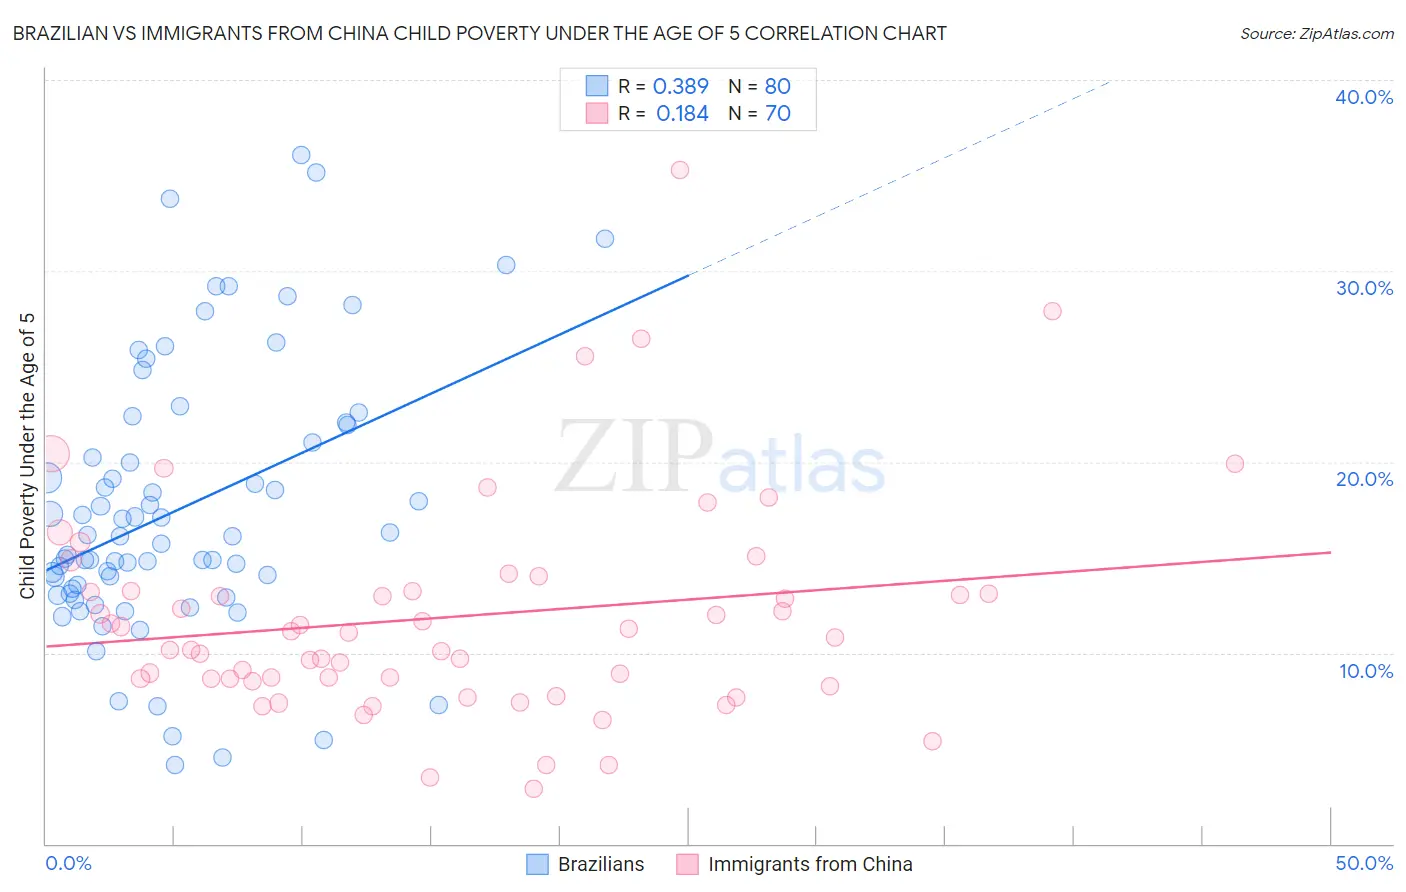 Brazilian vs Immigrants from China Child Poverty Under the Age of 5